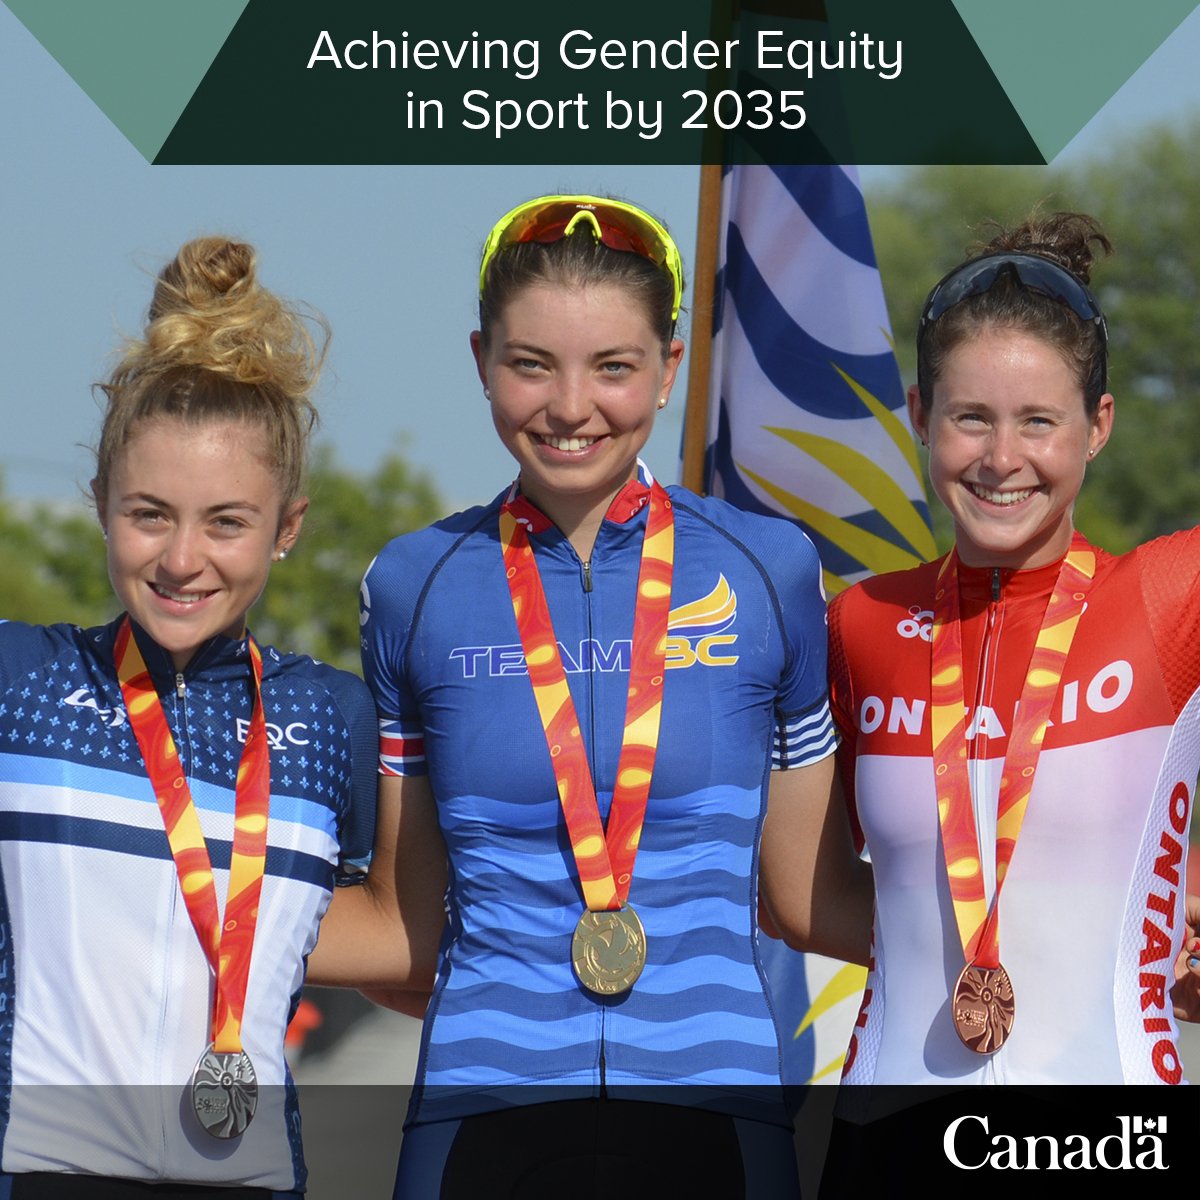 #DYK: If by the age of 10 a girl has yet to participate in sport, there is only a 10% chance she will be physically active as an adult. Tell the WG on #GenderEquity in Sport how you think we can increase 👩’s participation in sport: bit.ly/2tam3se  #EquityinSport